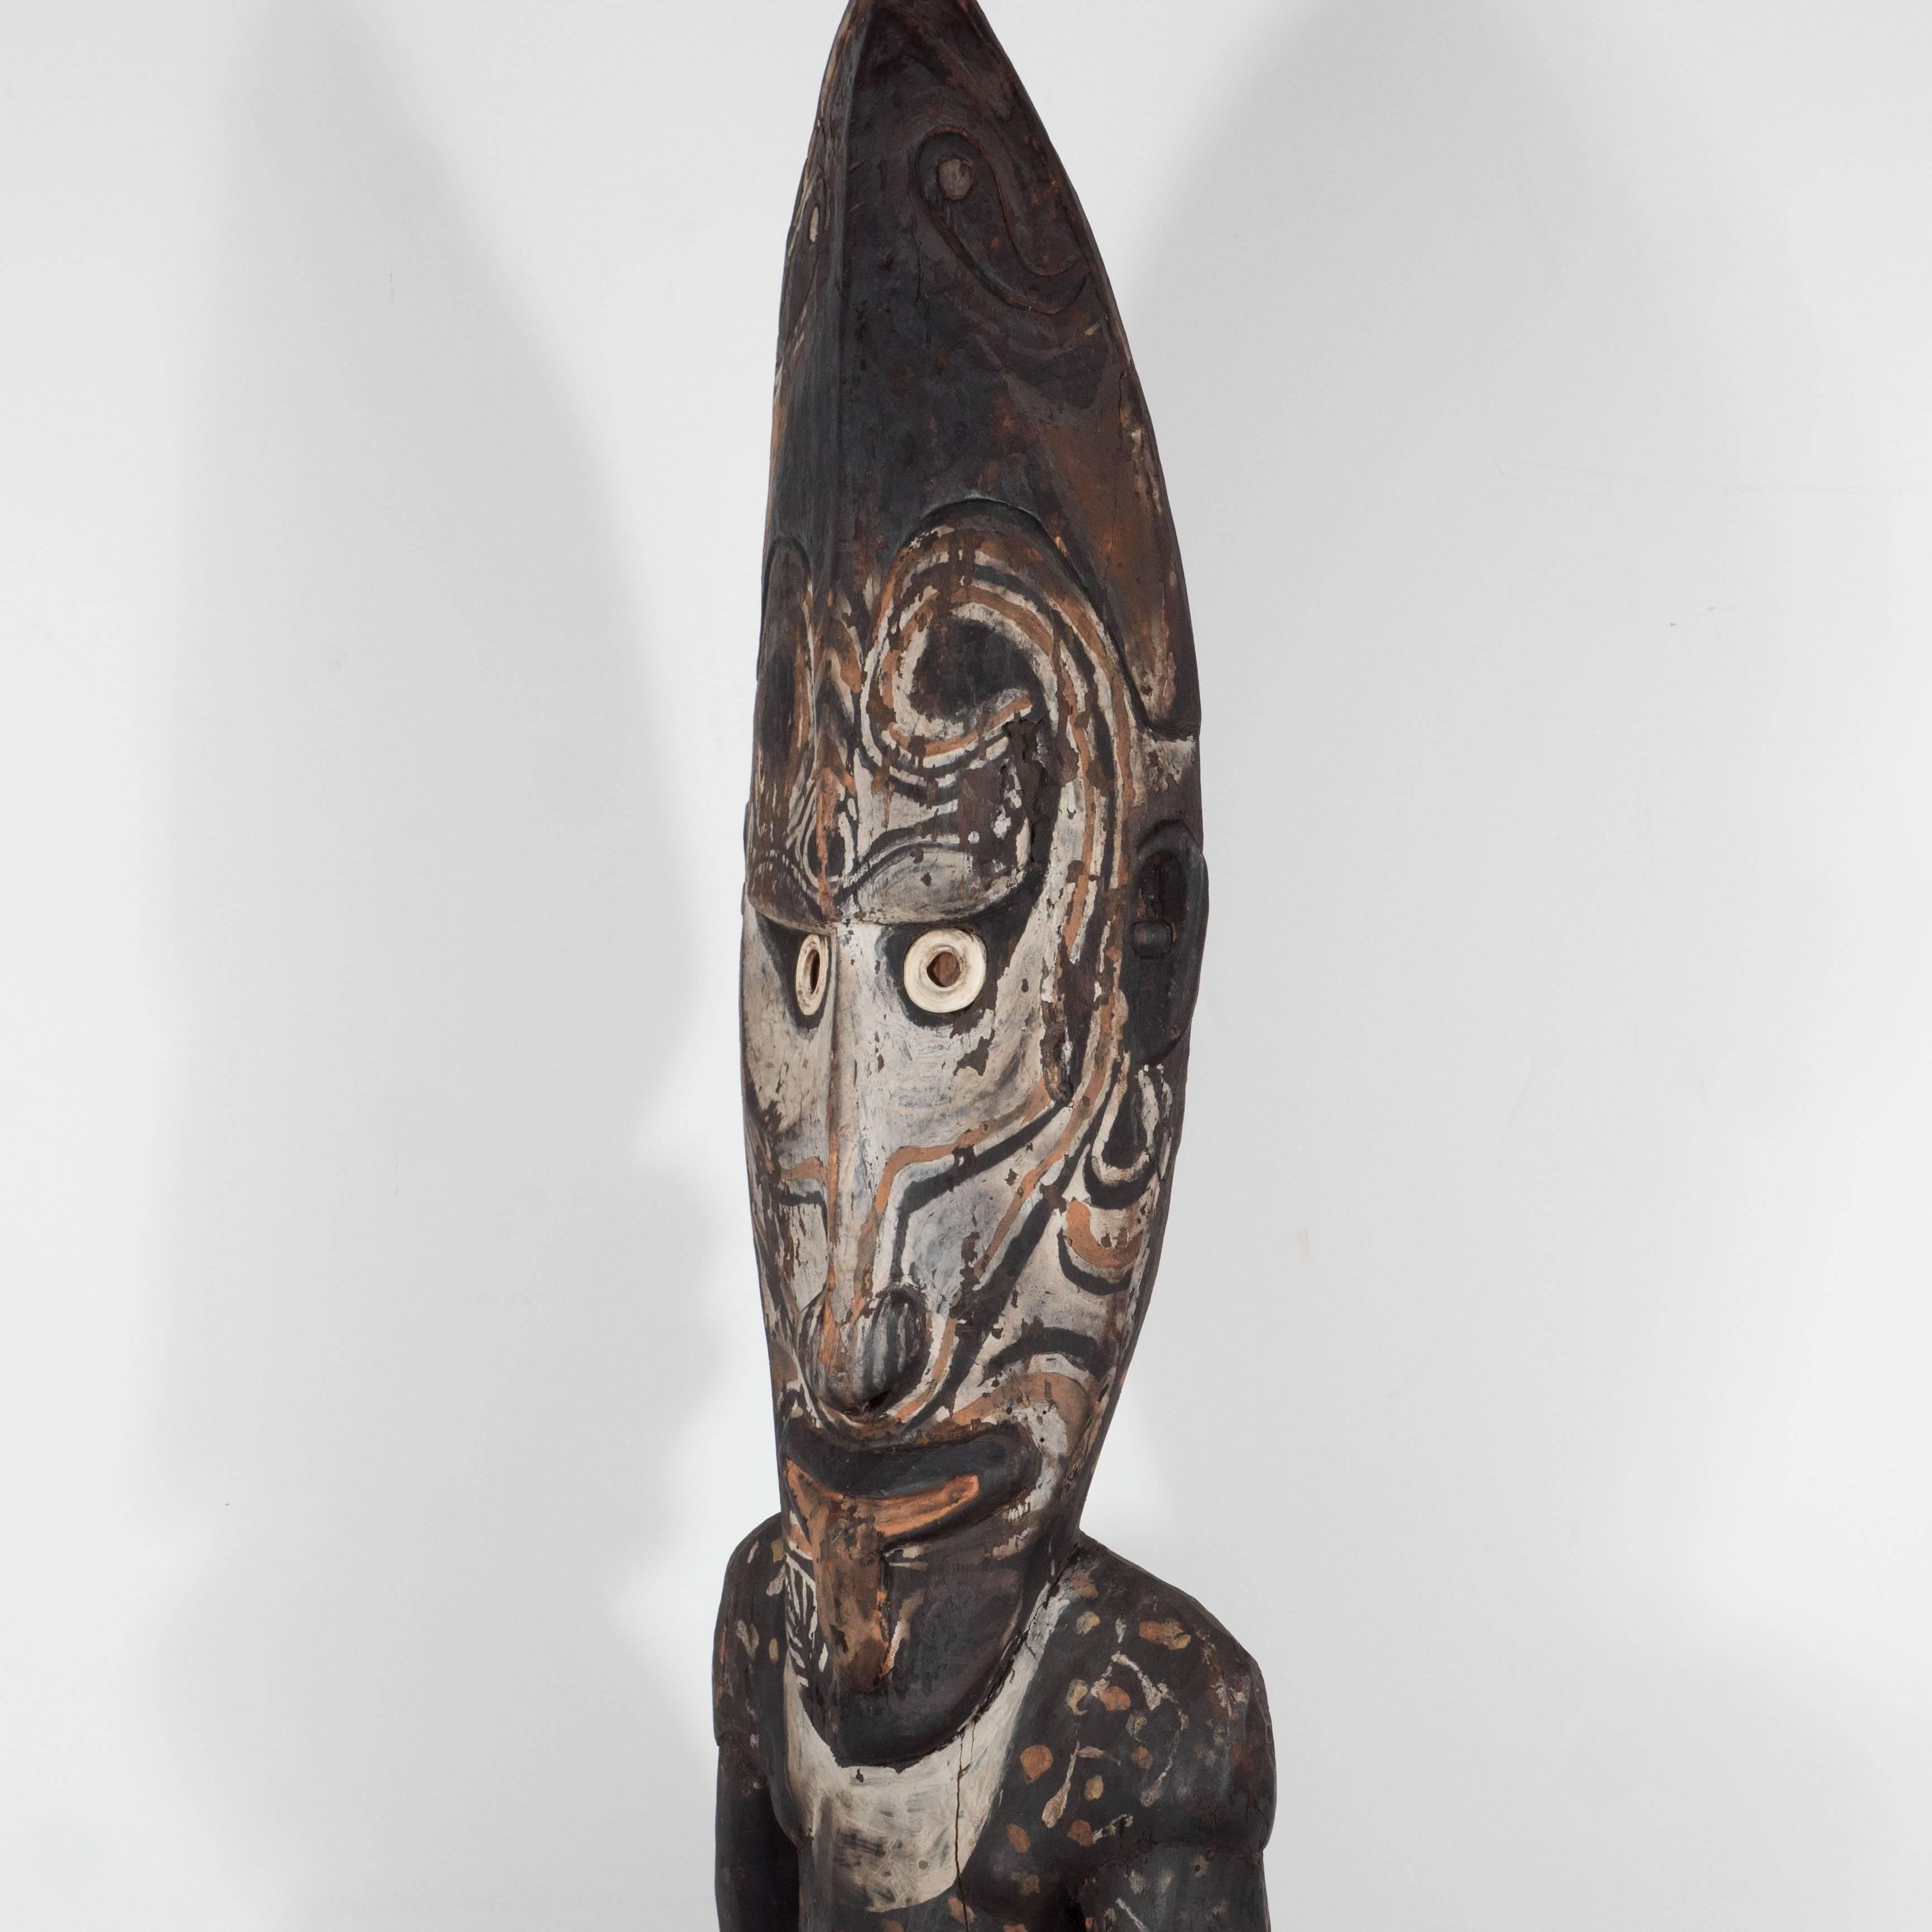 Large Carved and Painted Wood Spirit Figure Papua New Guinea, Late 19th Century - Brown Figurative Sculpture by Unknown